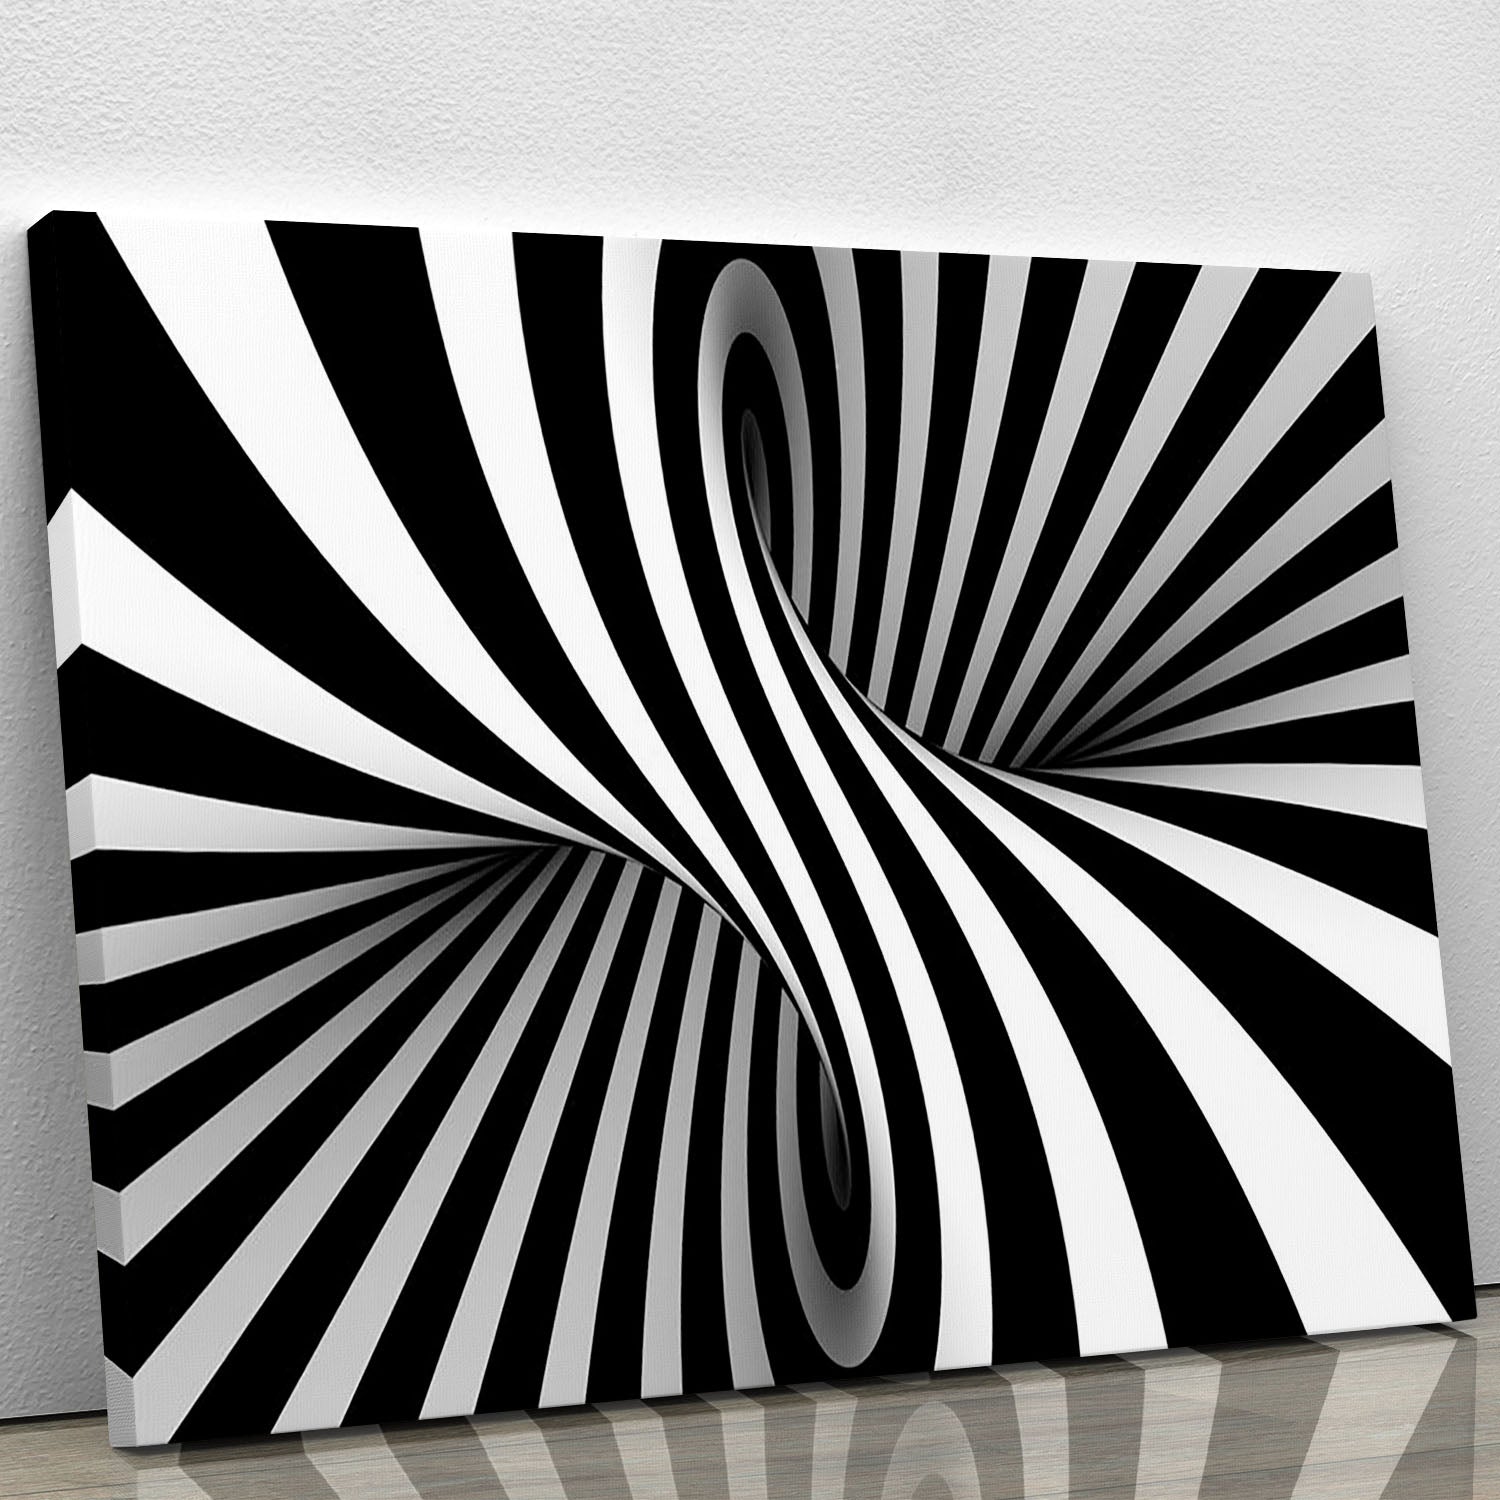 Black and White Optical Ilusion Canvas Print or Poster - Canvas Art Rocks - 1